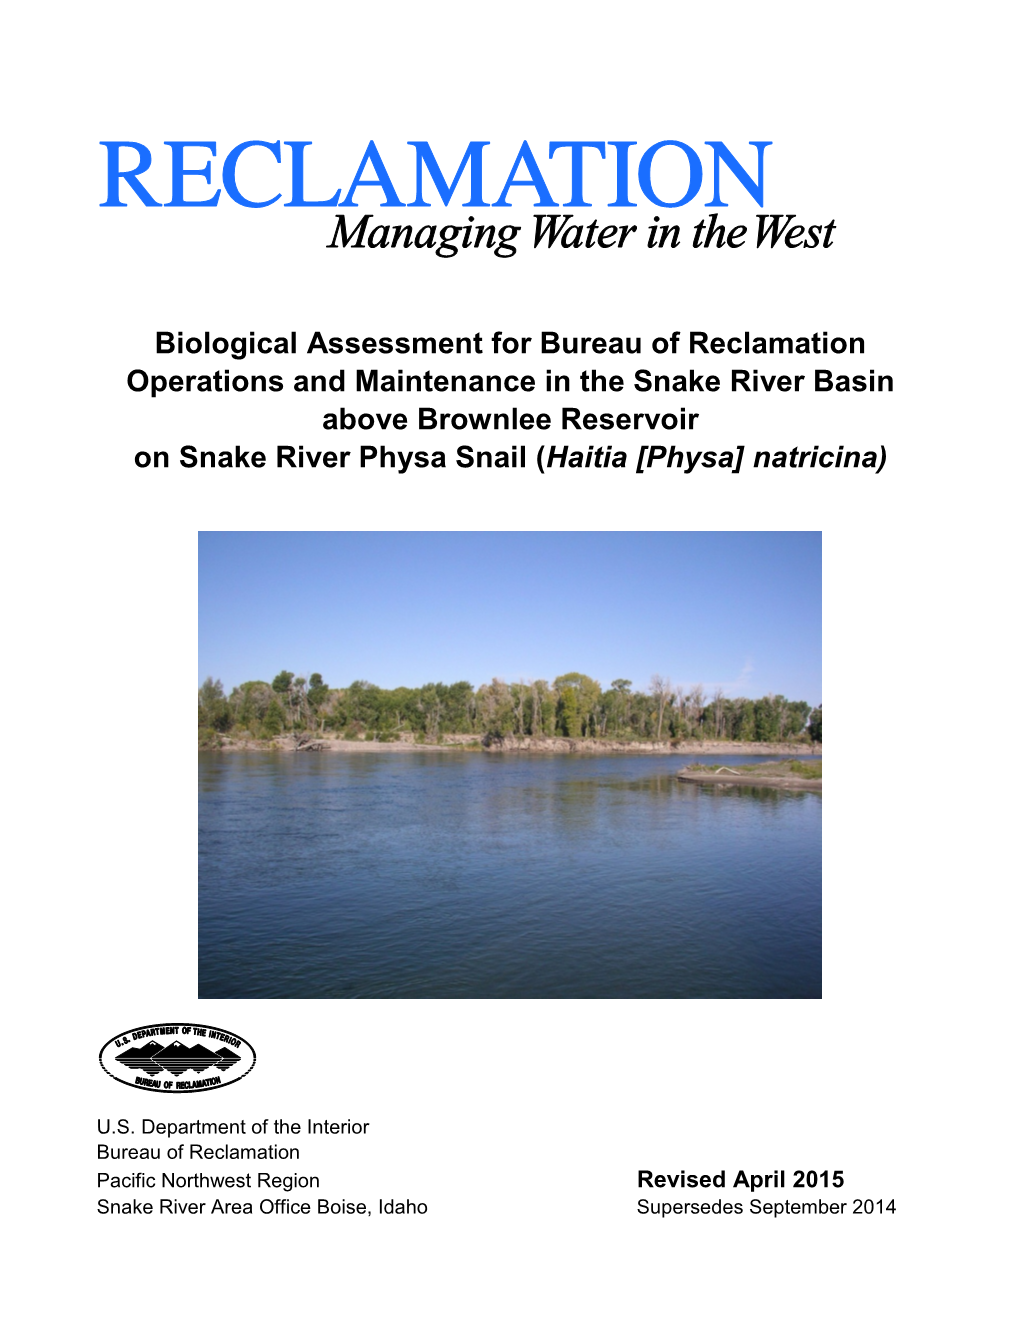 Revised Biological Assessment for the Bureau of Reclamation Operations